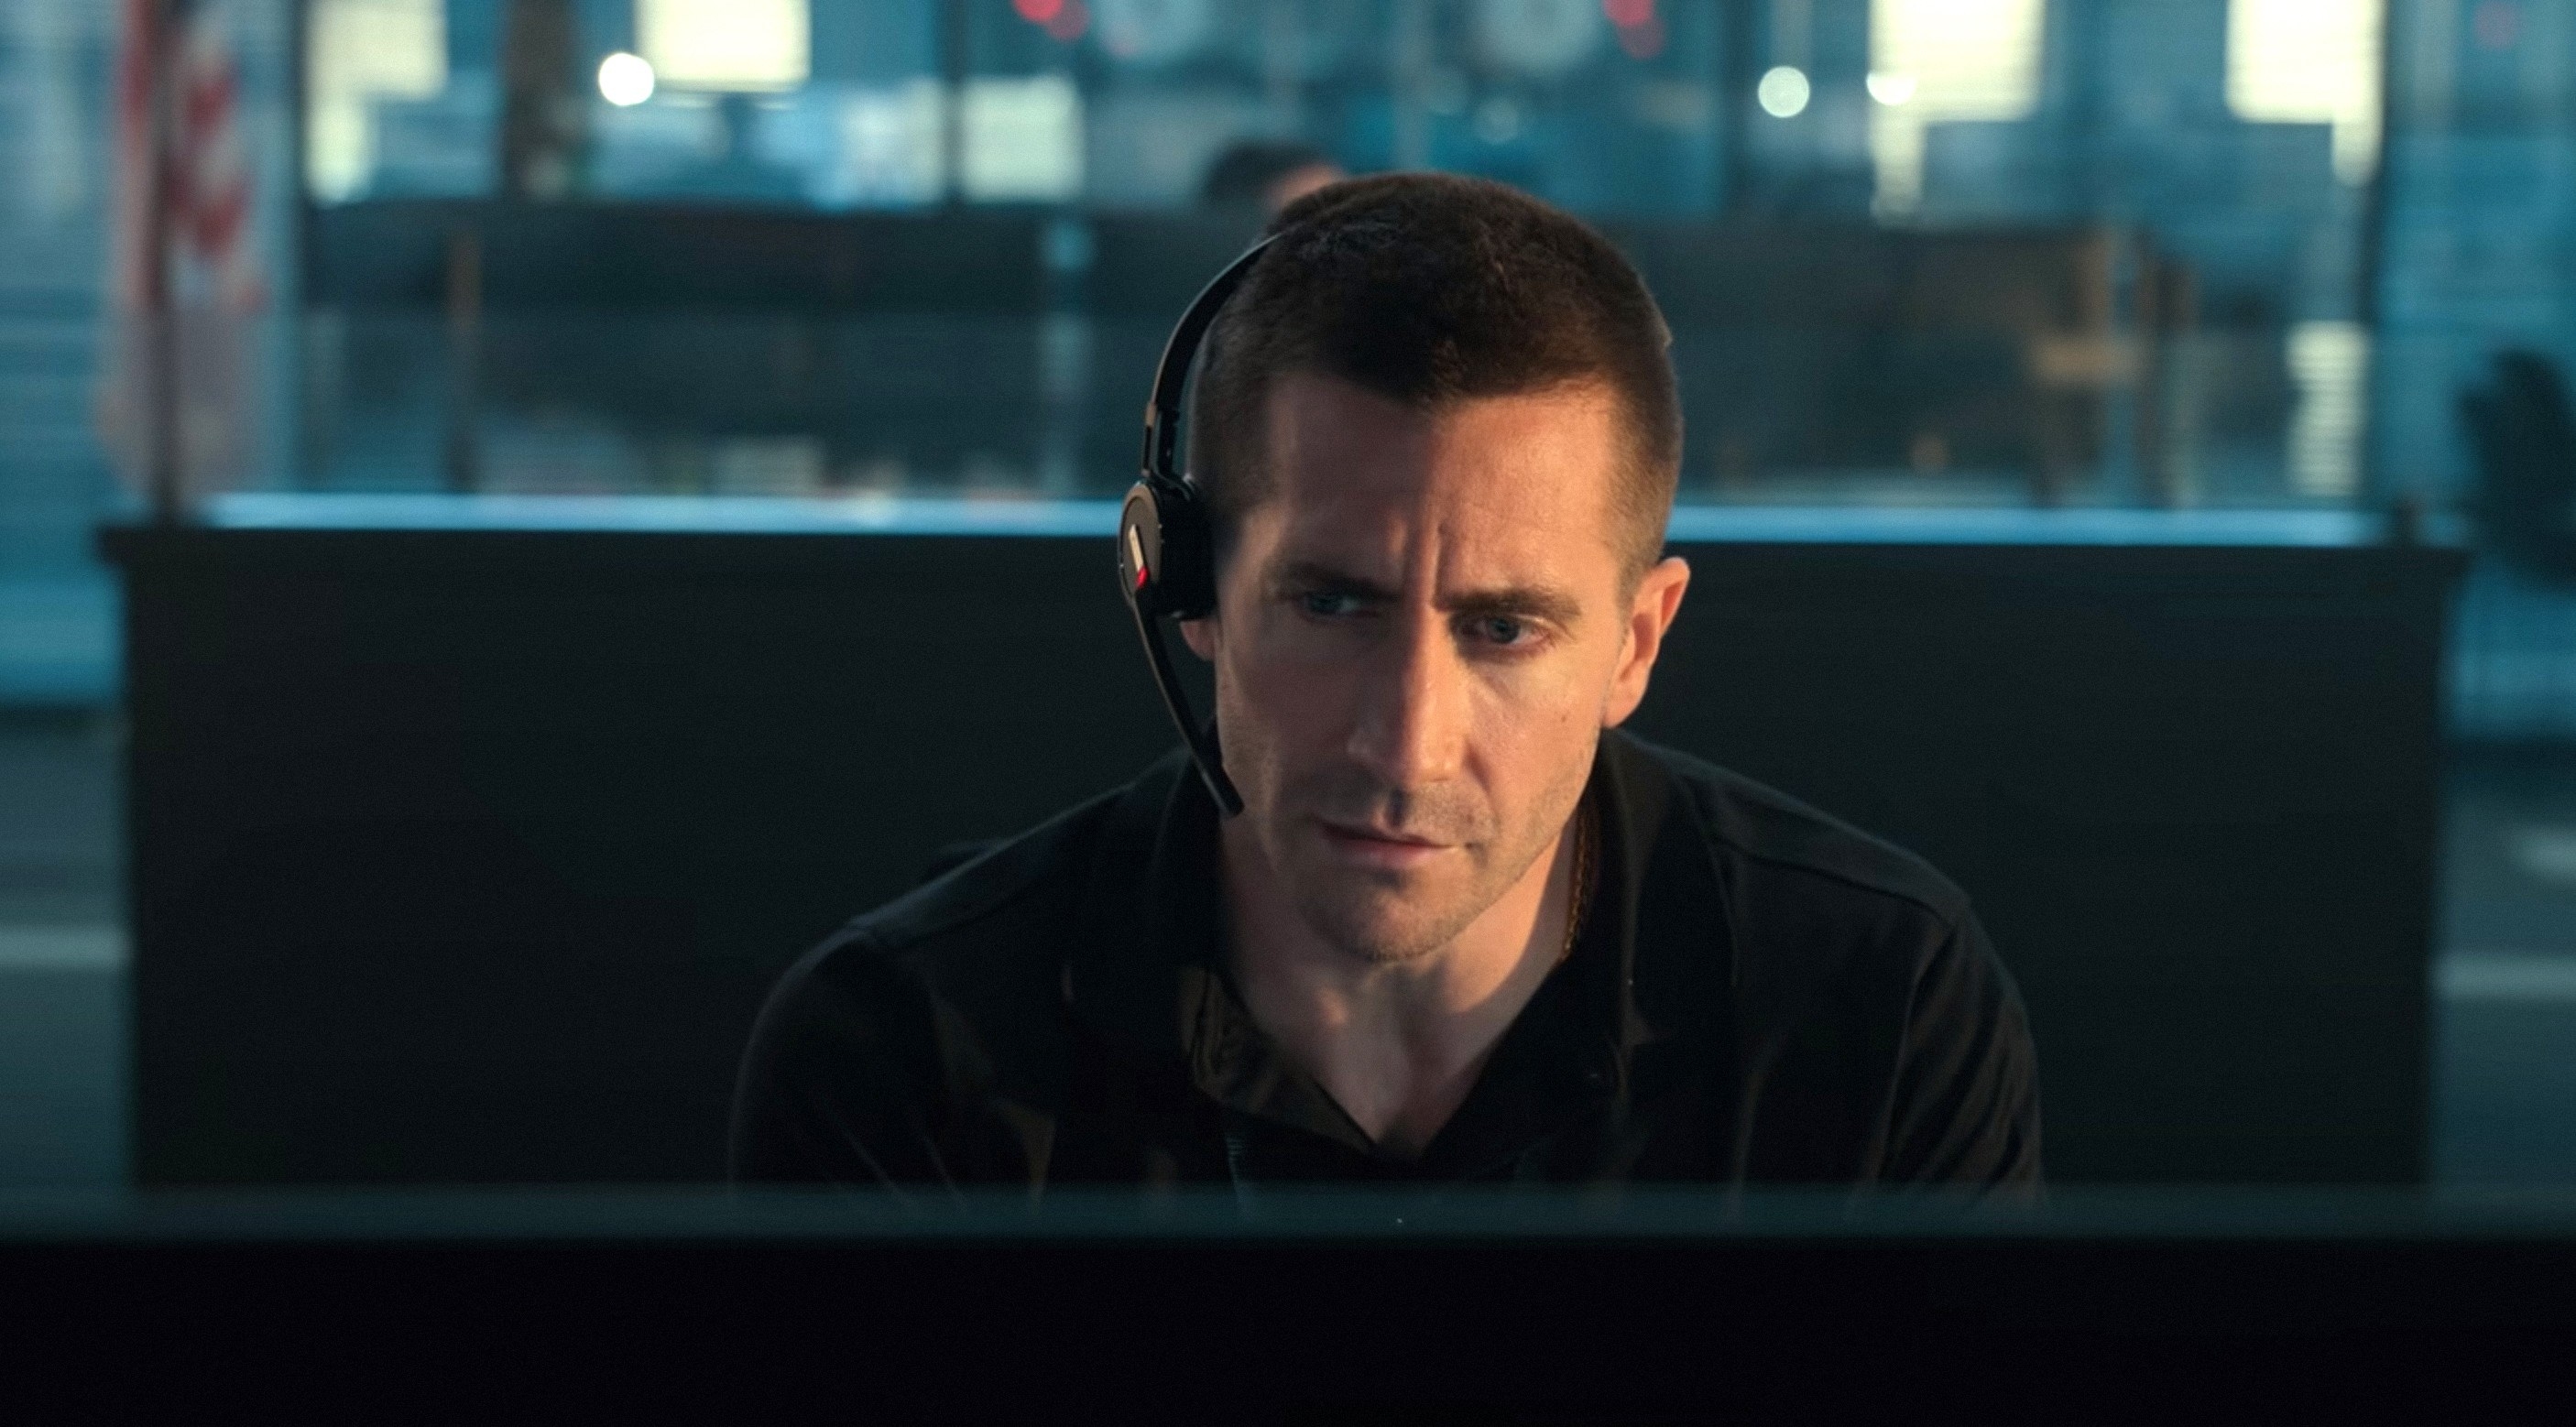 Jake Gyllenhaal stares at a computer screen